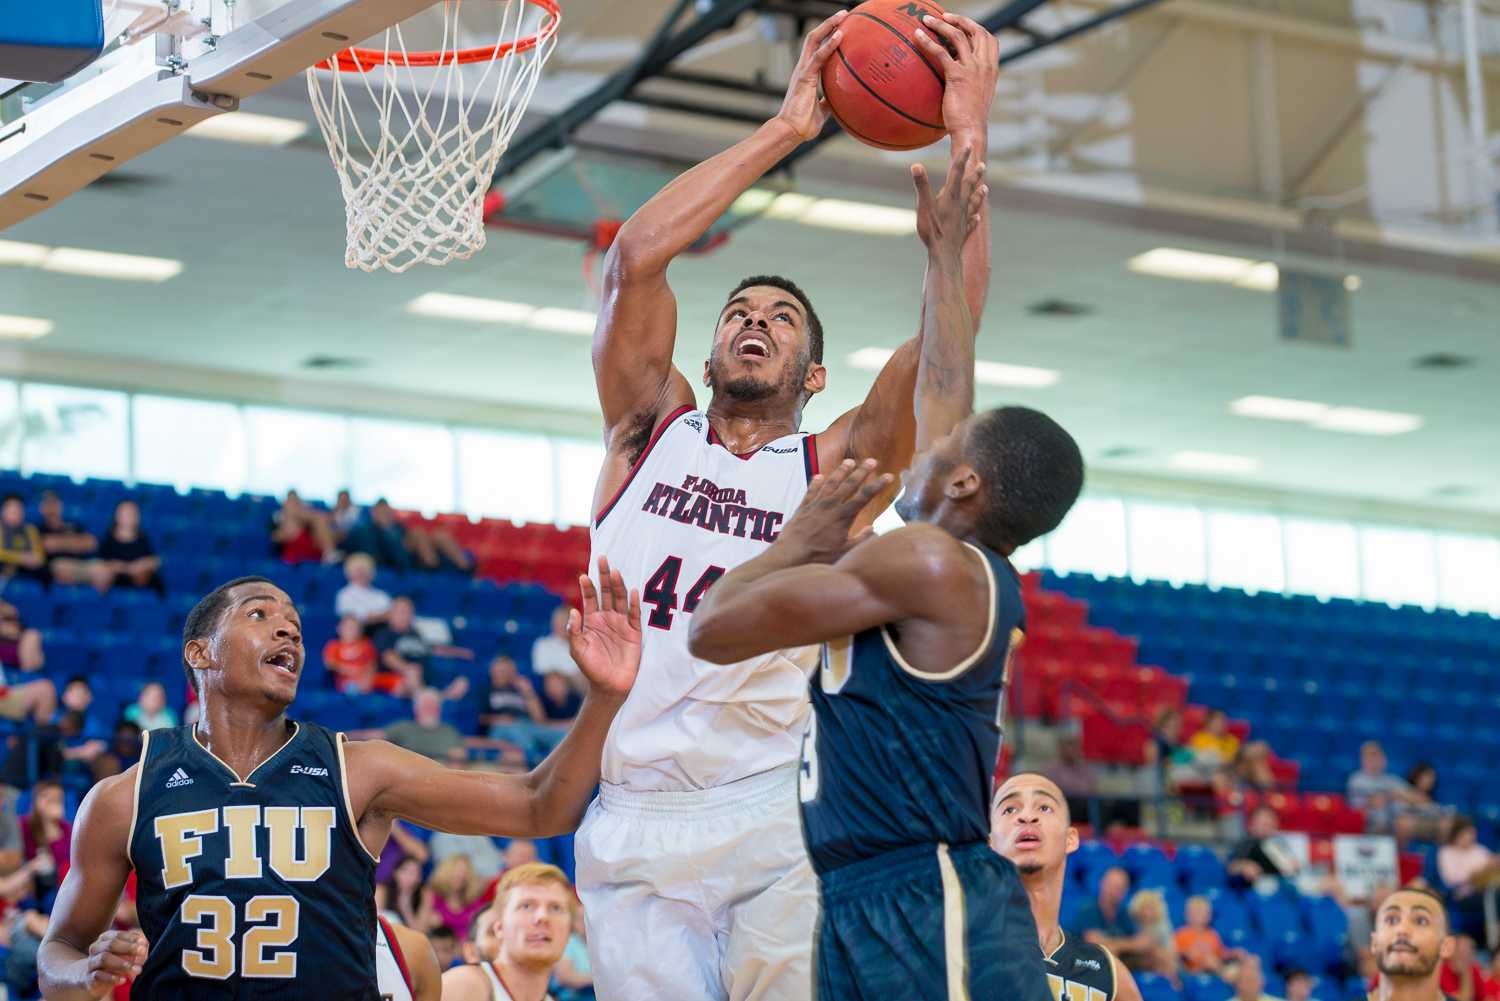  FAU forward Kelvin (44) Penn grabs a rebound as Panthers center Michael Phillip attempts to gain possession. 